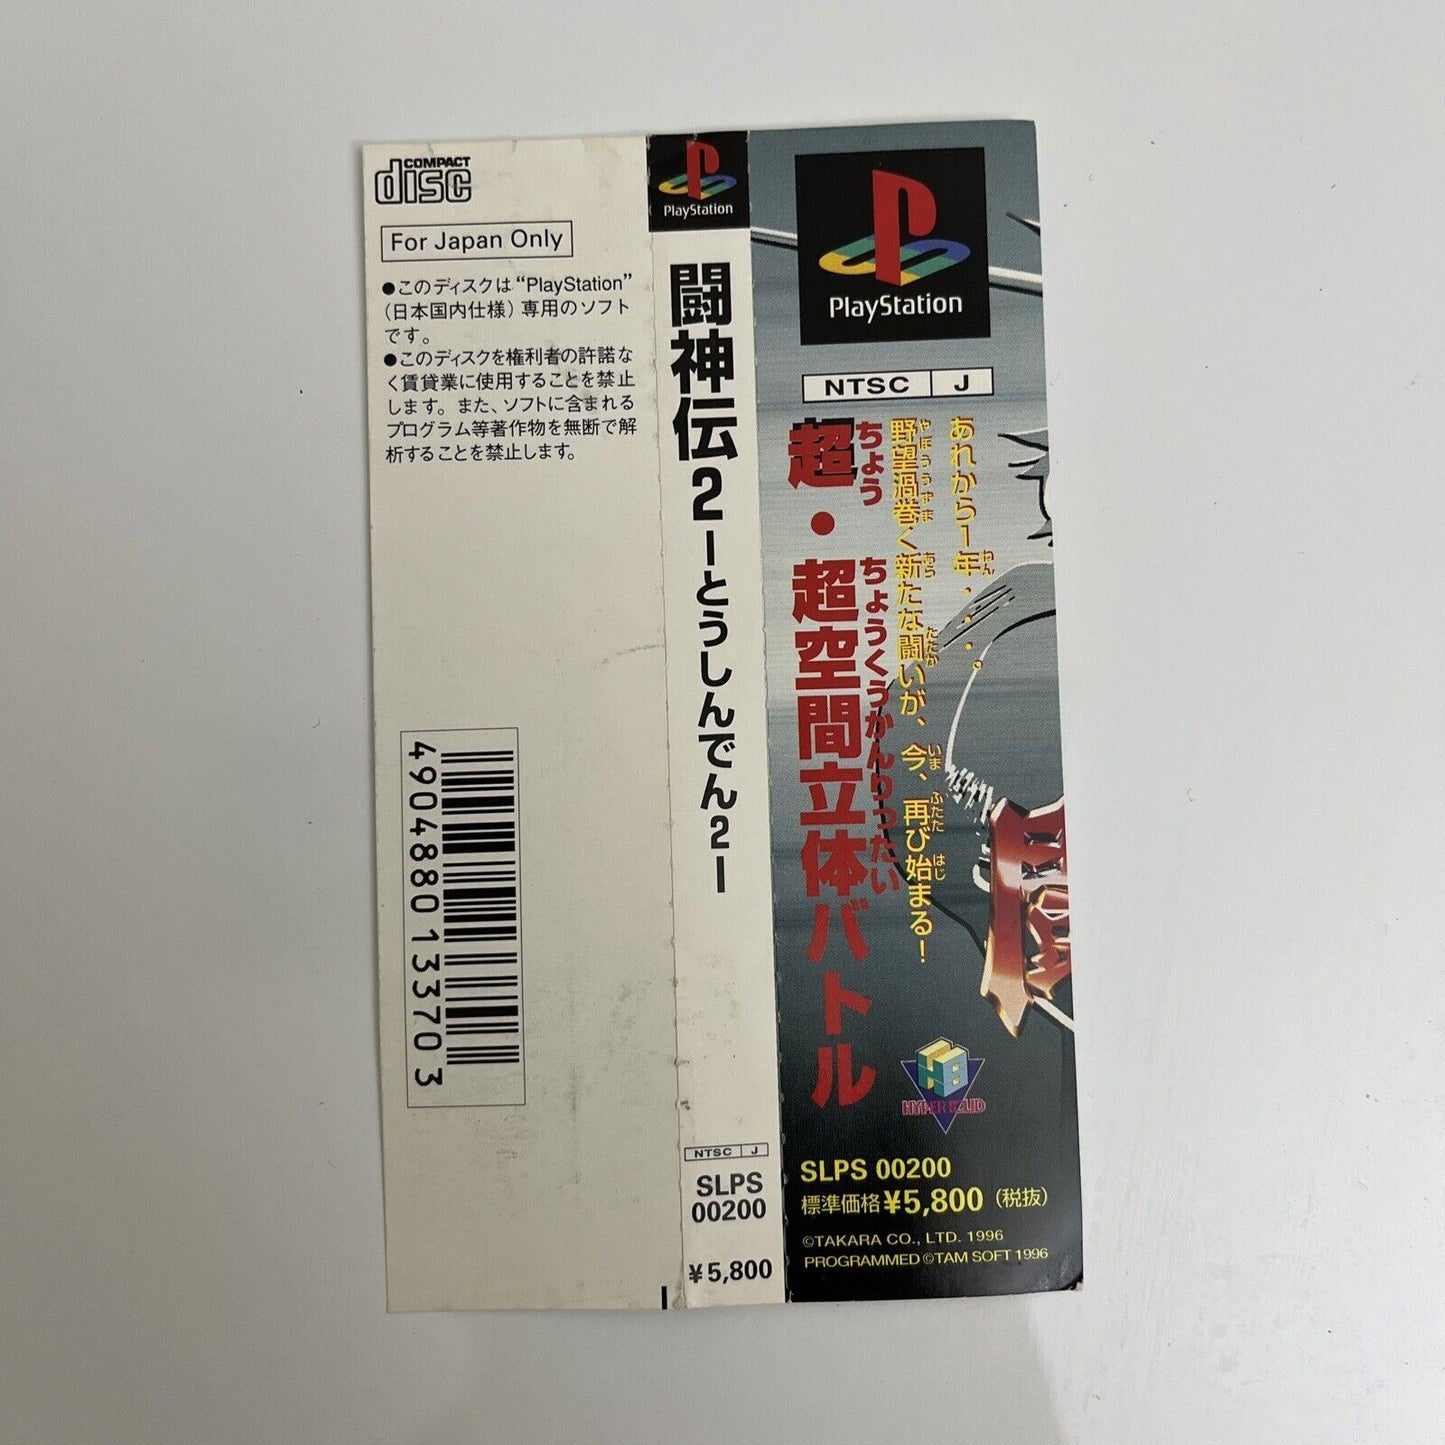 Battle Arena Toshinden 2 - Sony PlayStation PS1 NTSC-J JAPAN Game